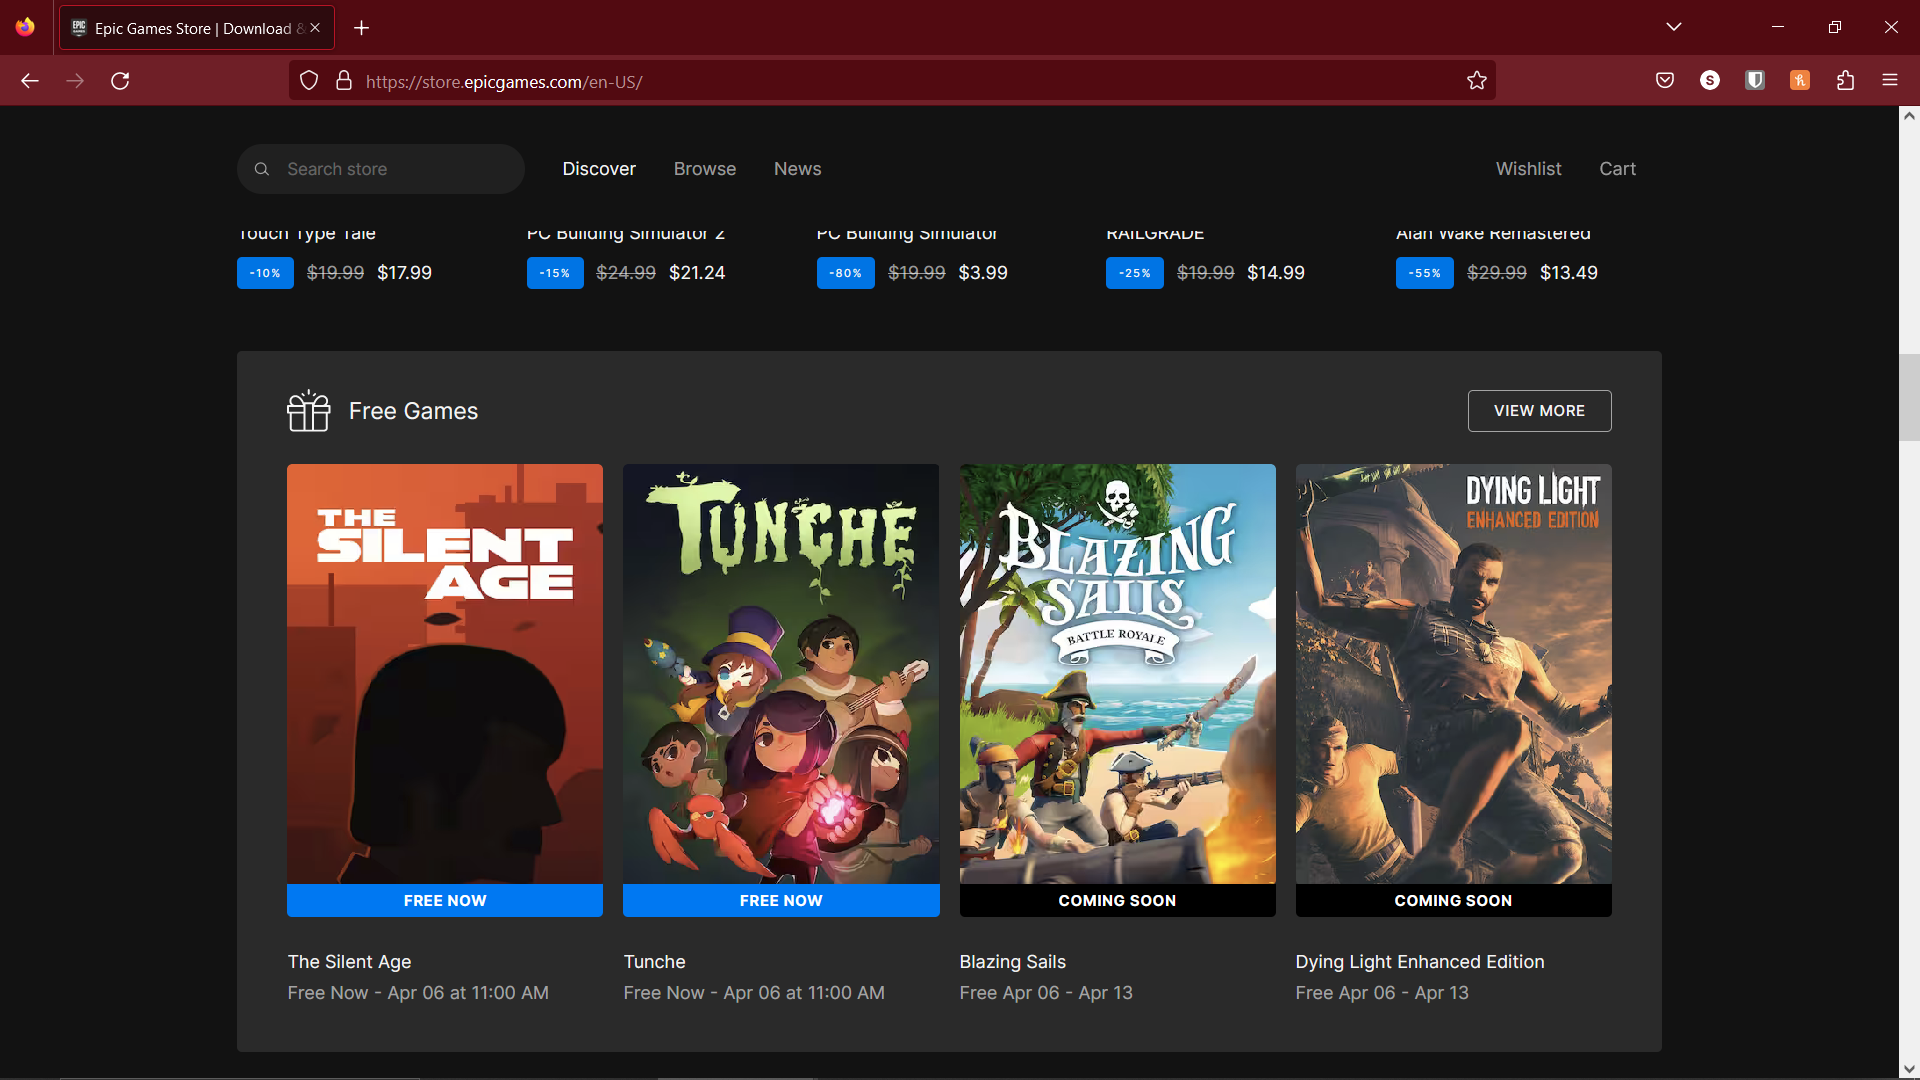 The free games category on the Epic Games website